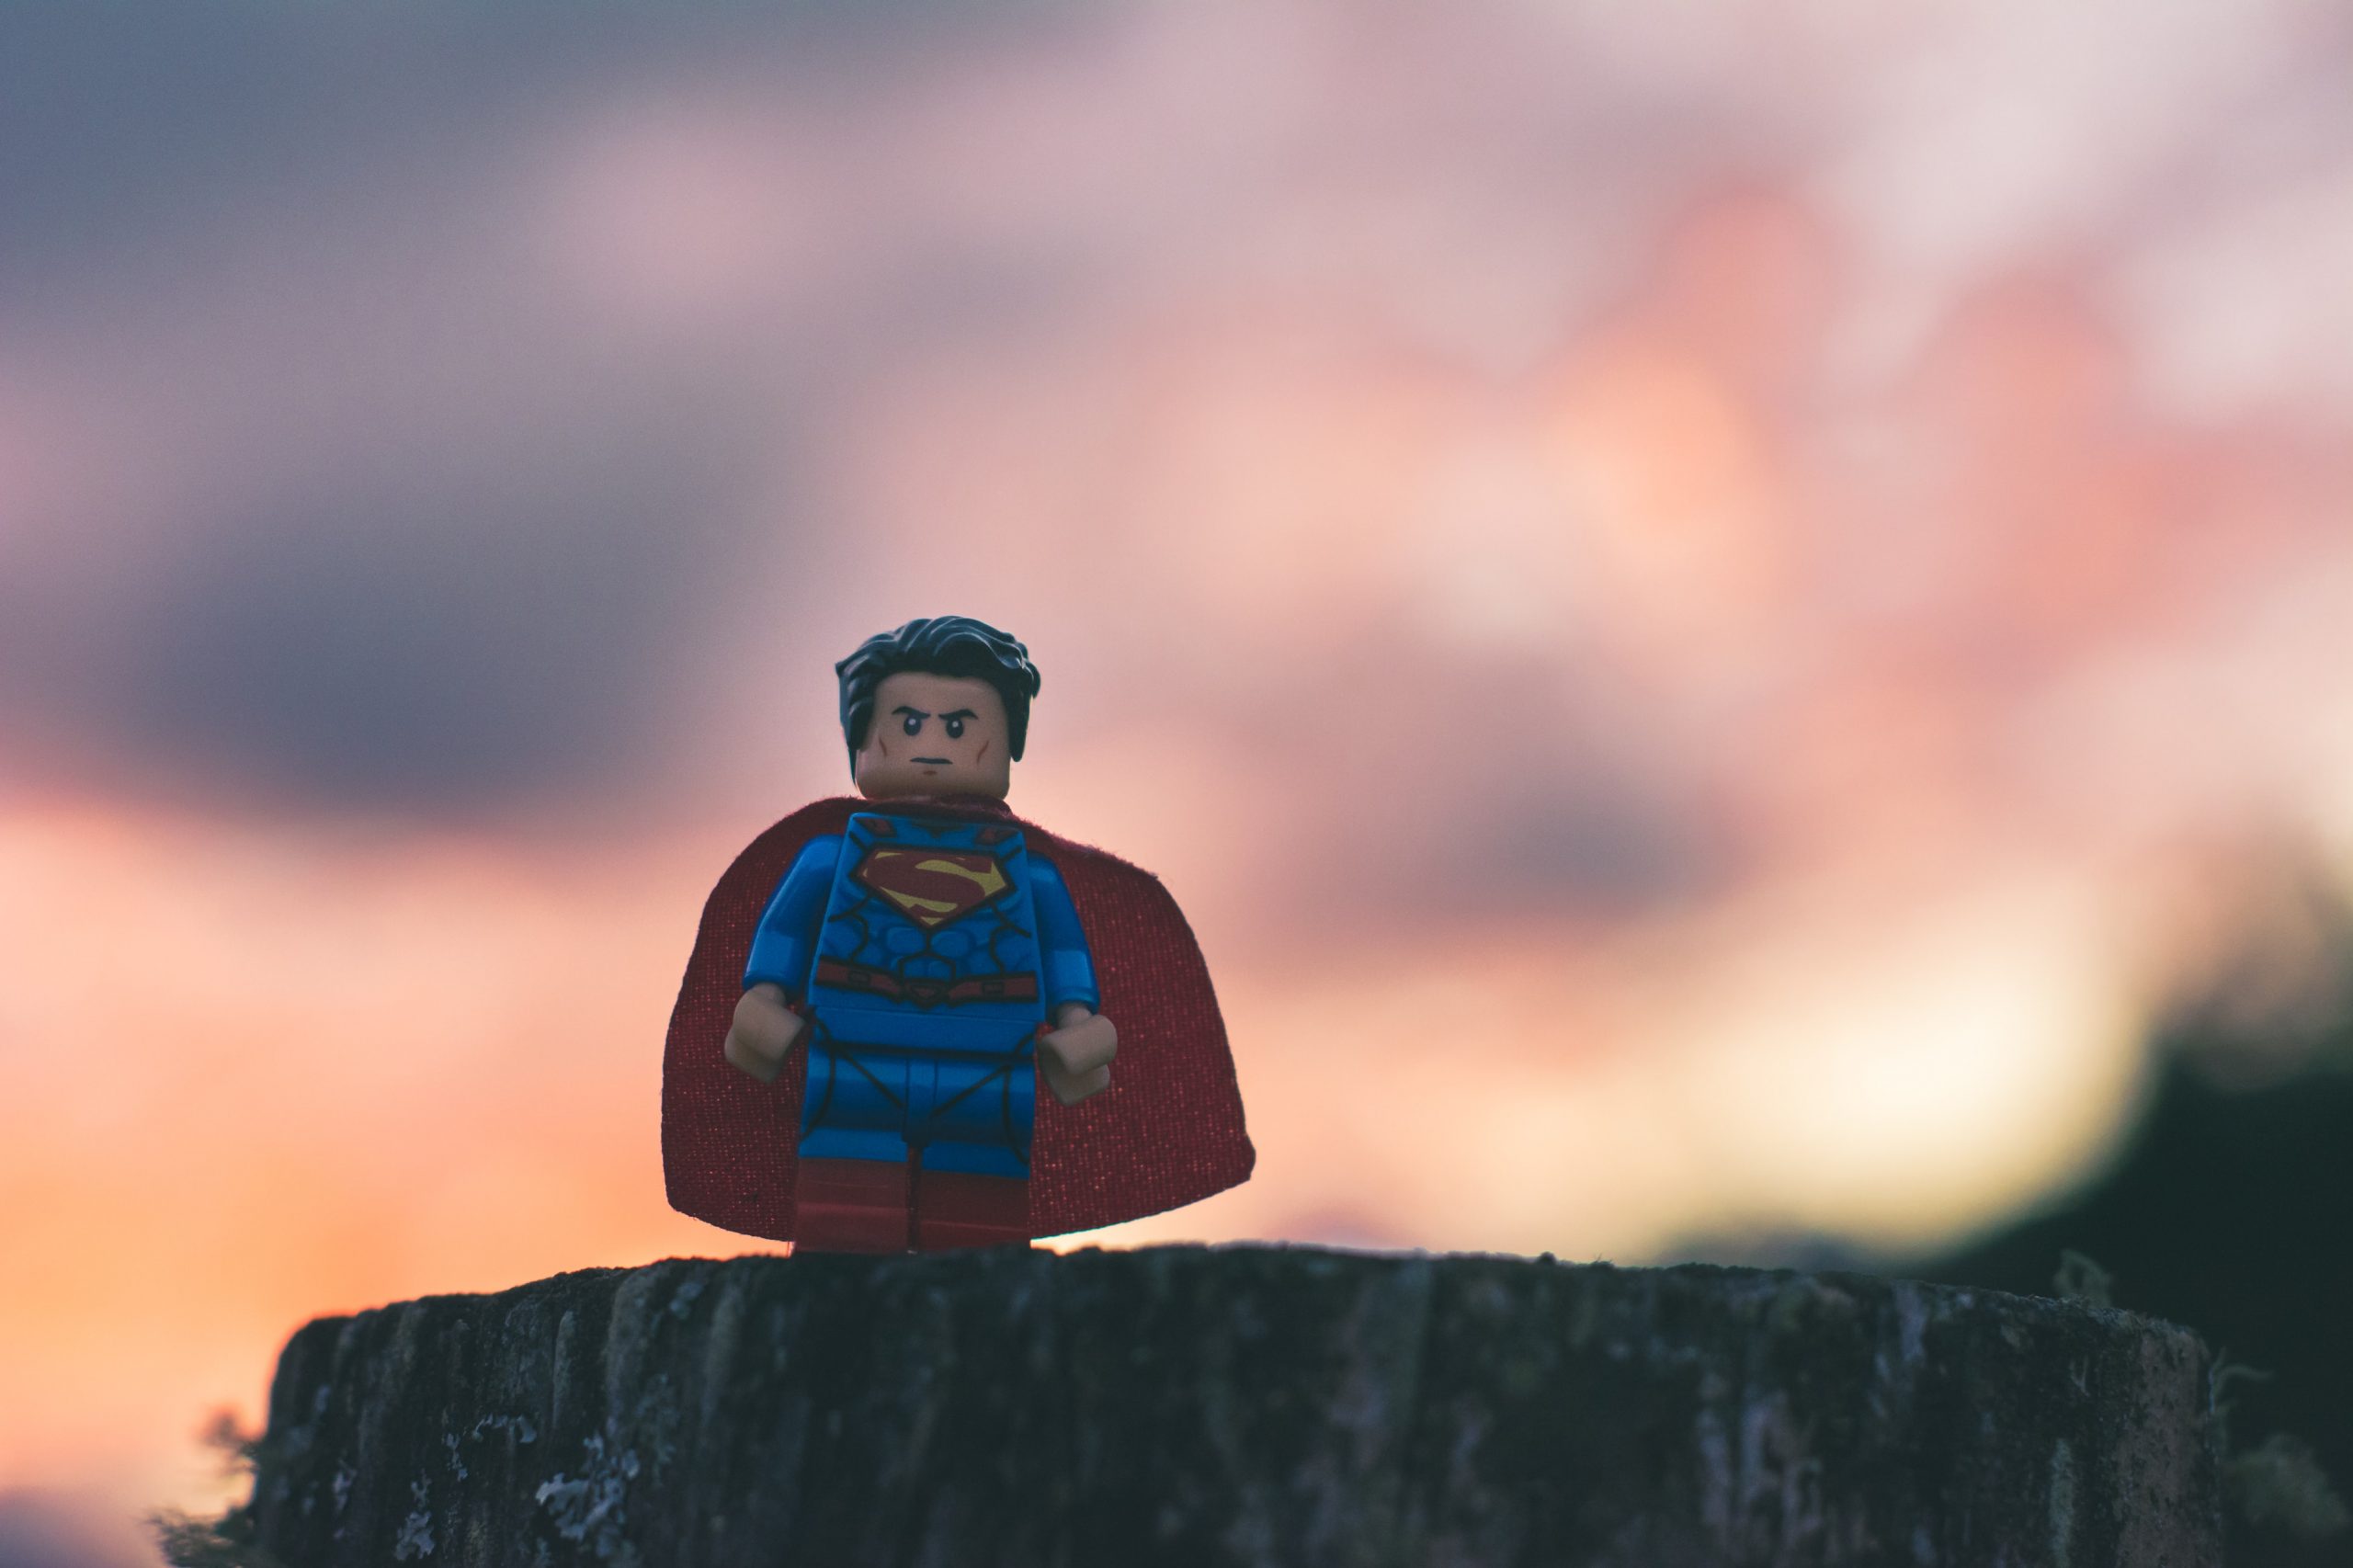 How do I use the hero’s journey to market my law firm?